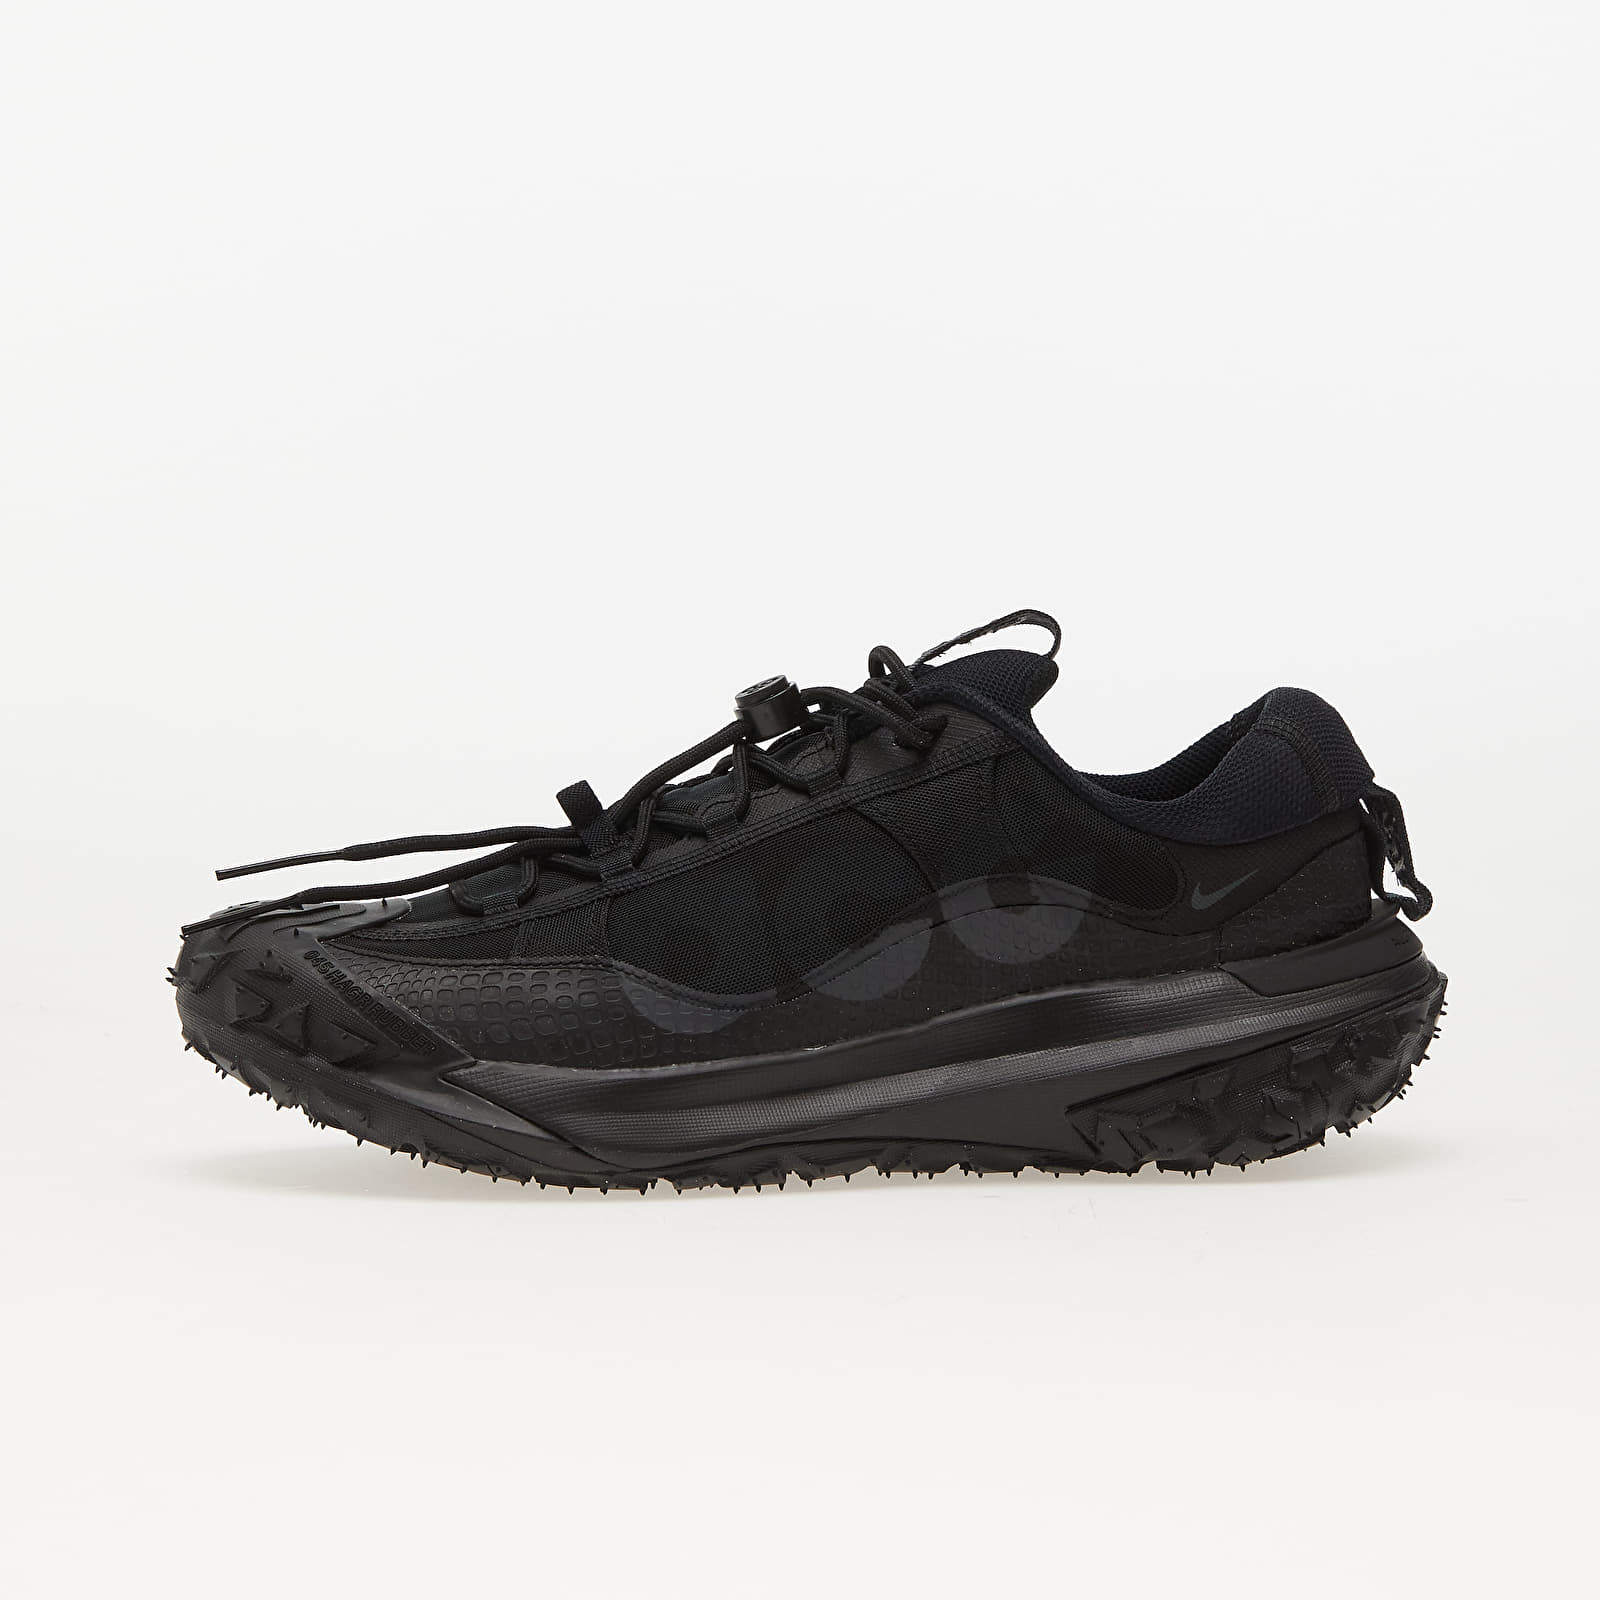 Baskets et chaussures pour hommes Nike ACG Mountain Fly 2 Low Black/ Anthracite-Black-Black